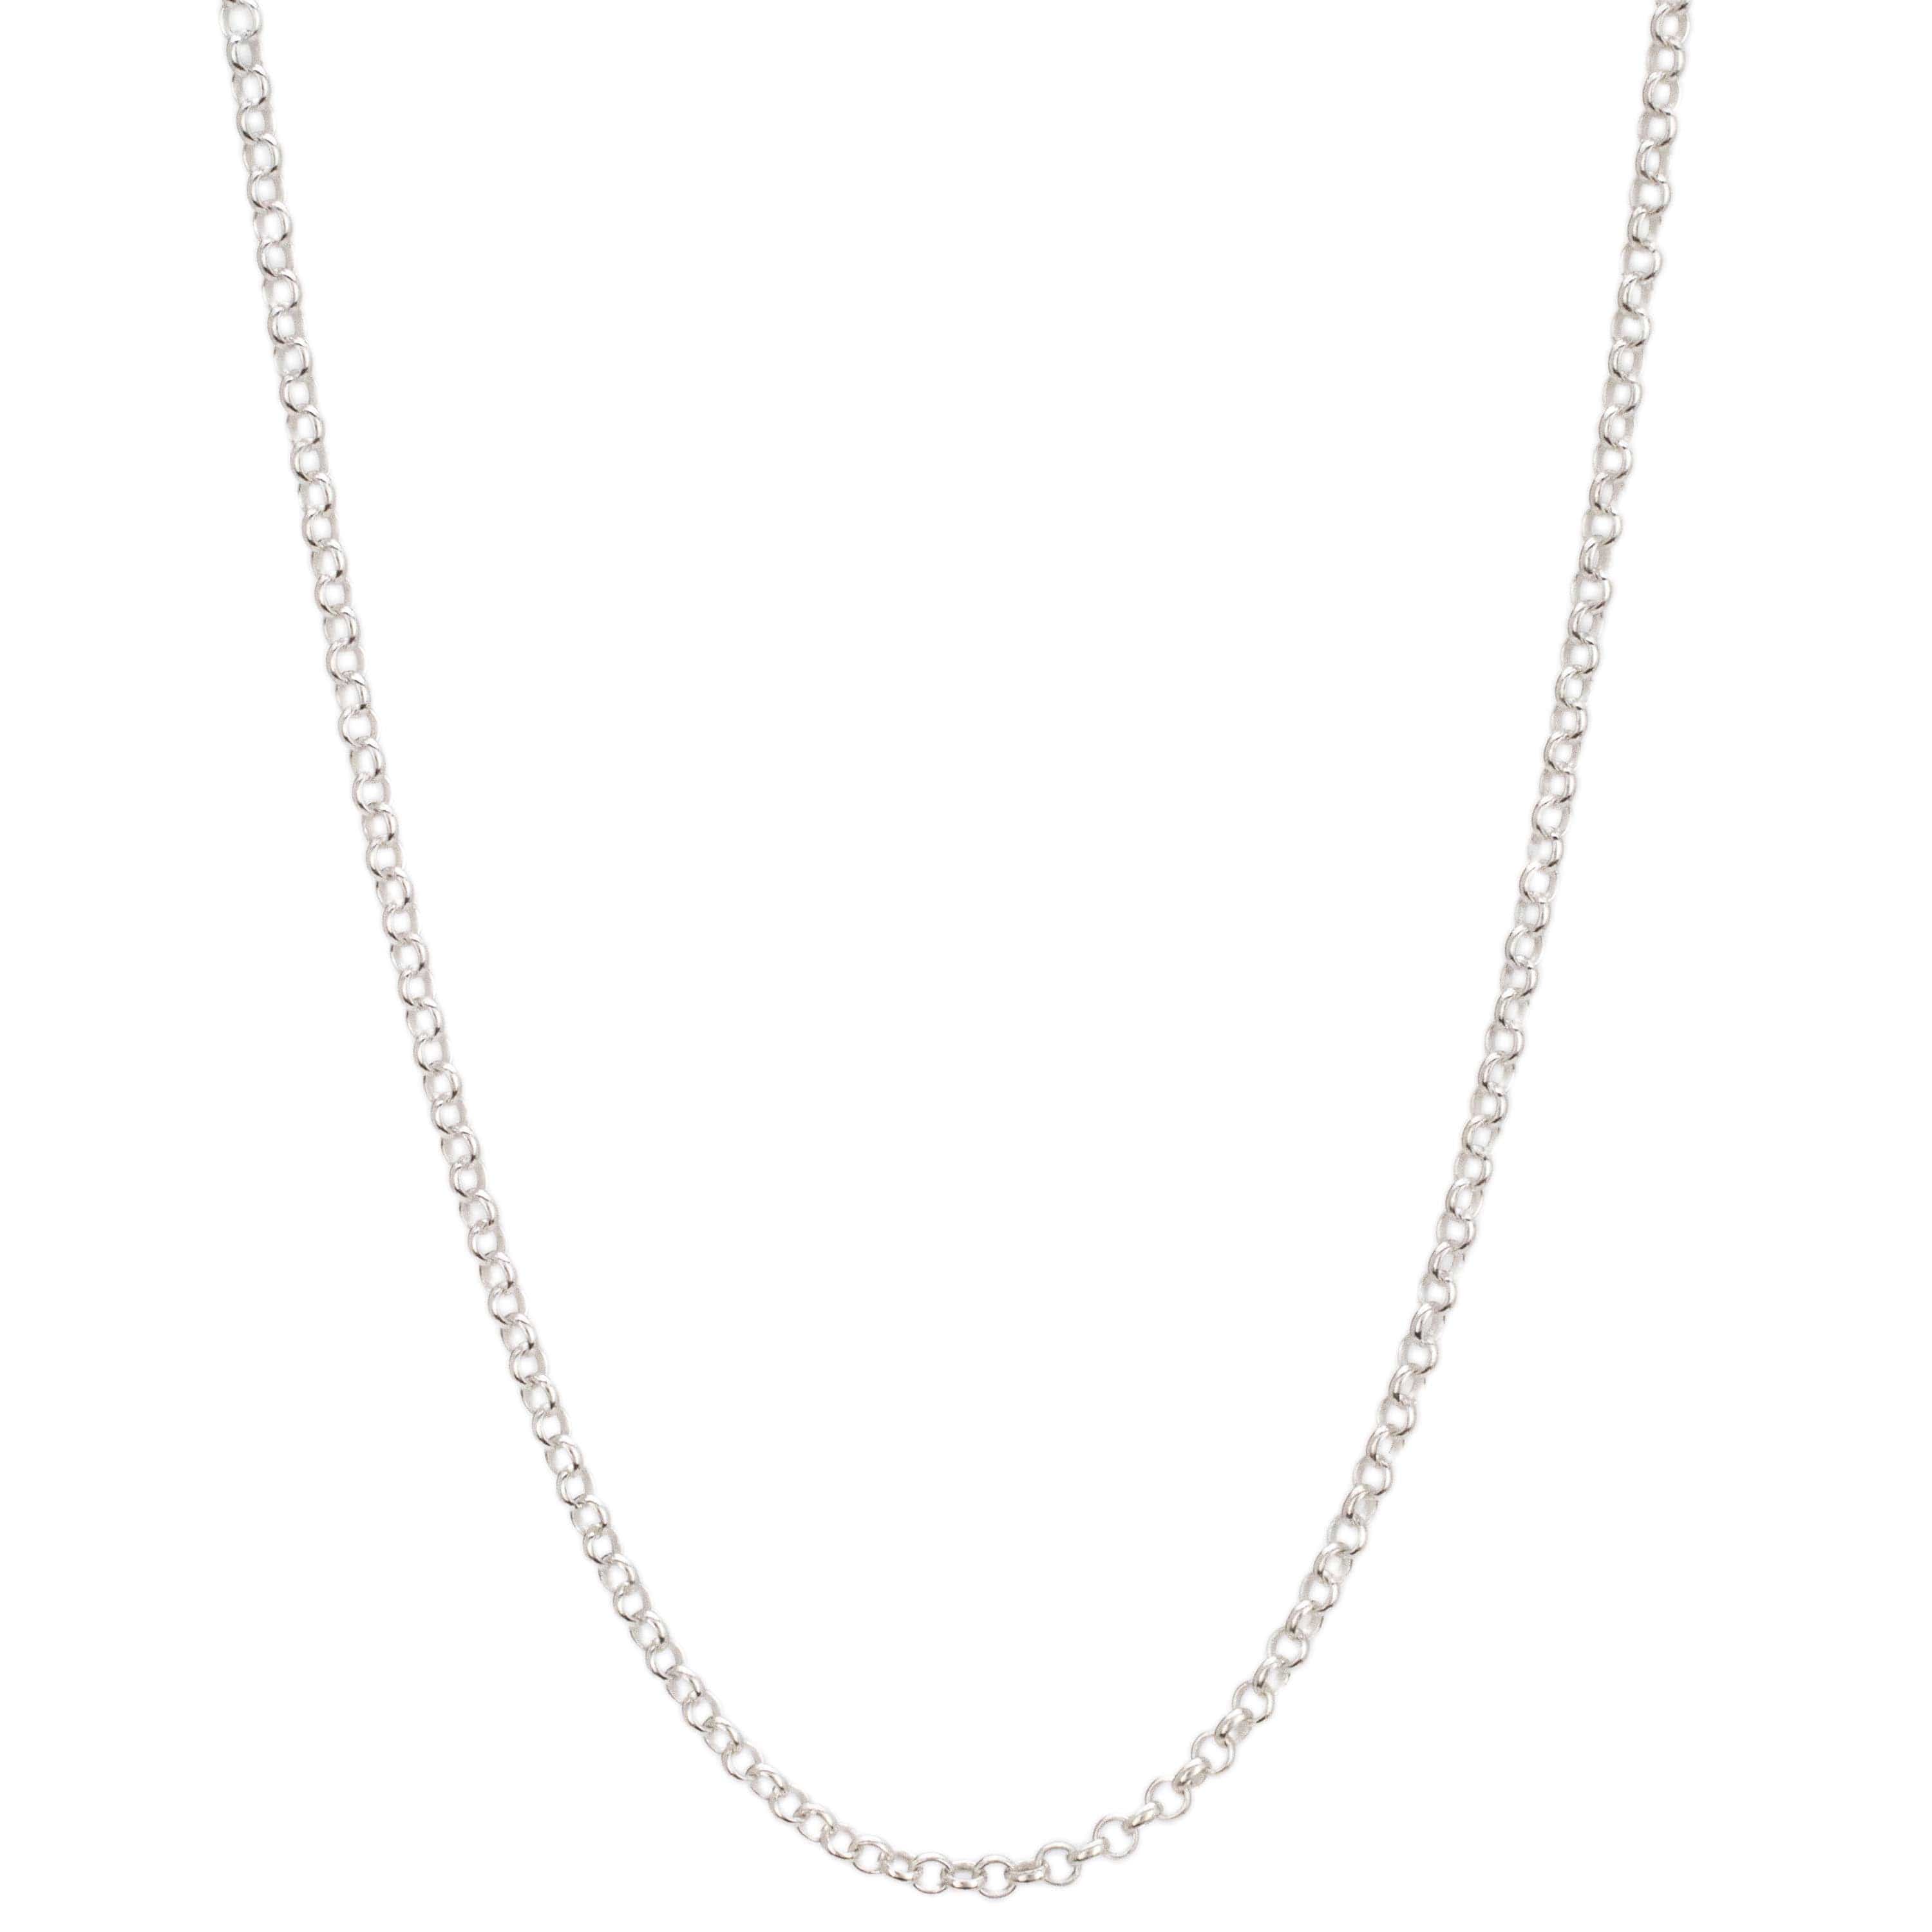 Kalifano Sterling Silver Chains 22" Italian Sterling Silver Cable Chain Necklace 2mm SC-RL030-22